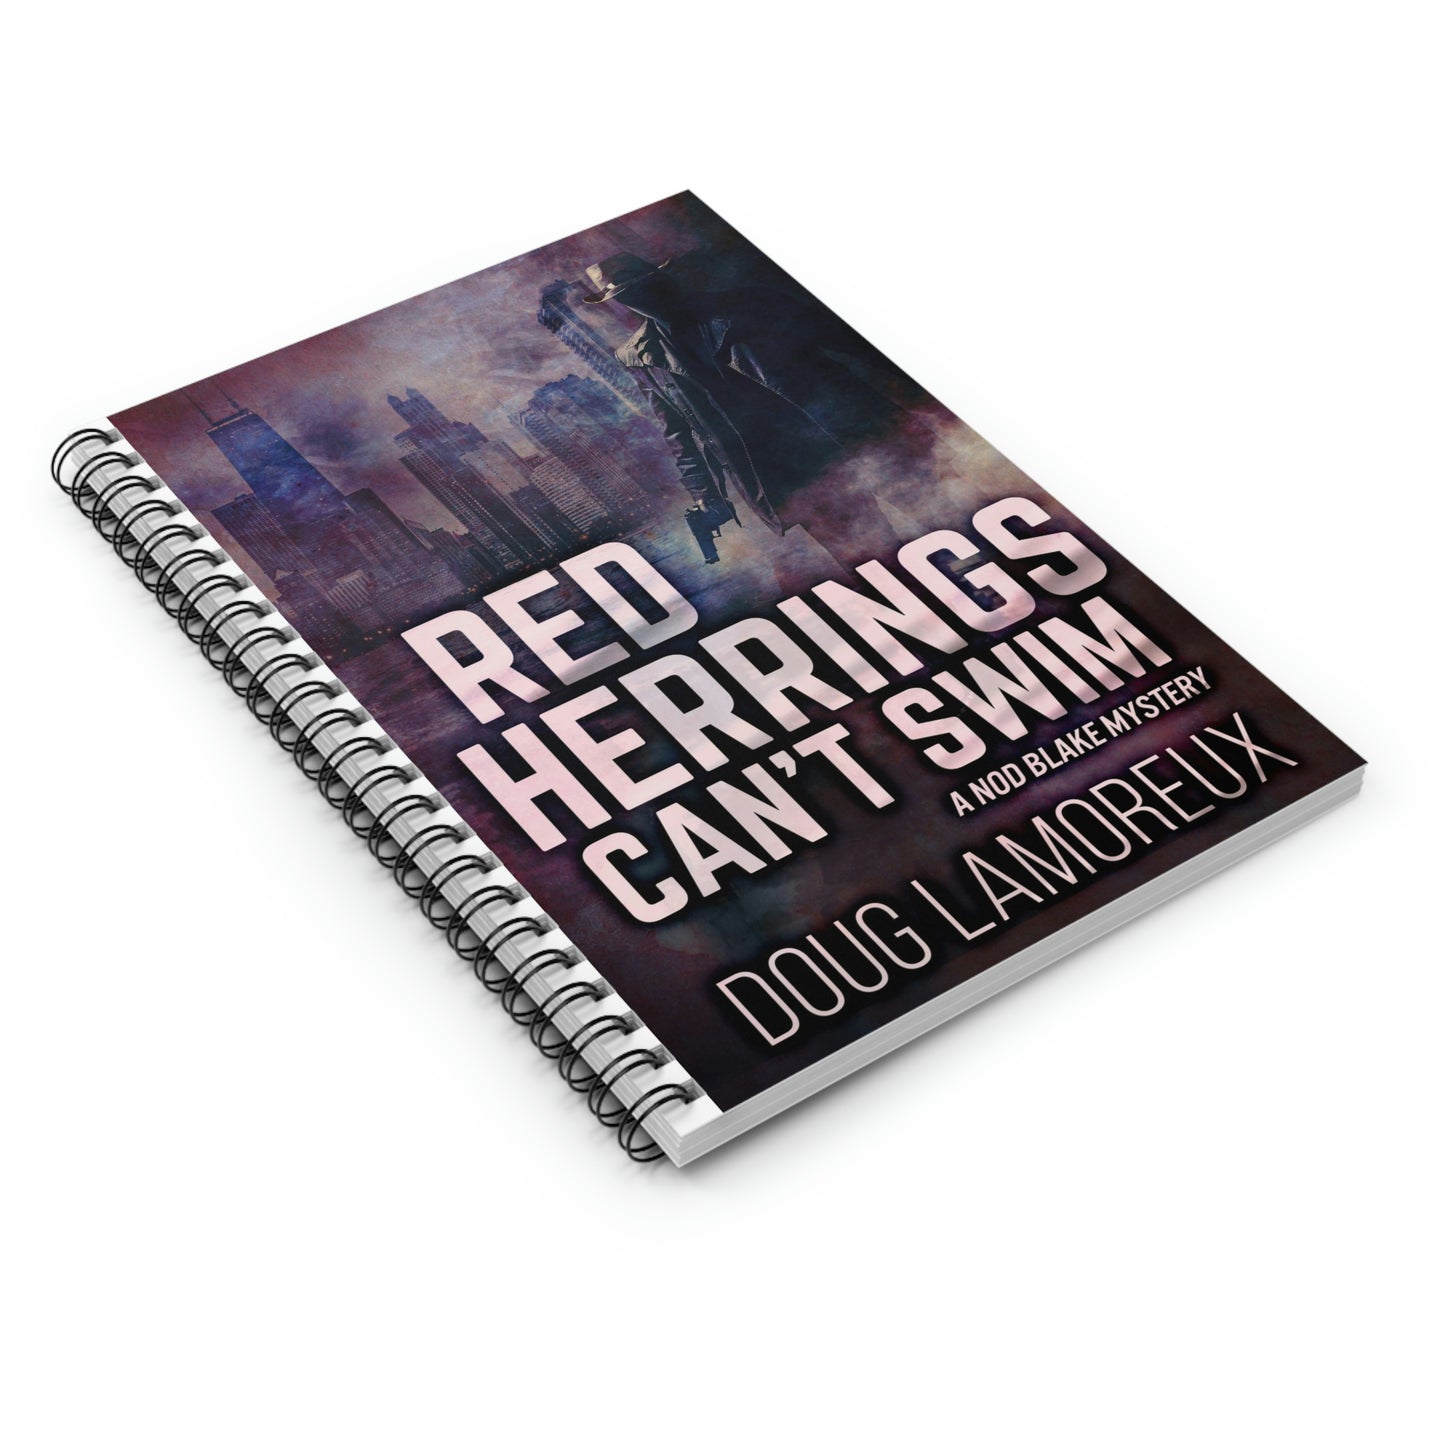 Red Herrings Can't Swim - Spiral Notebook